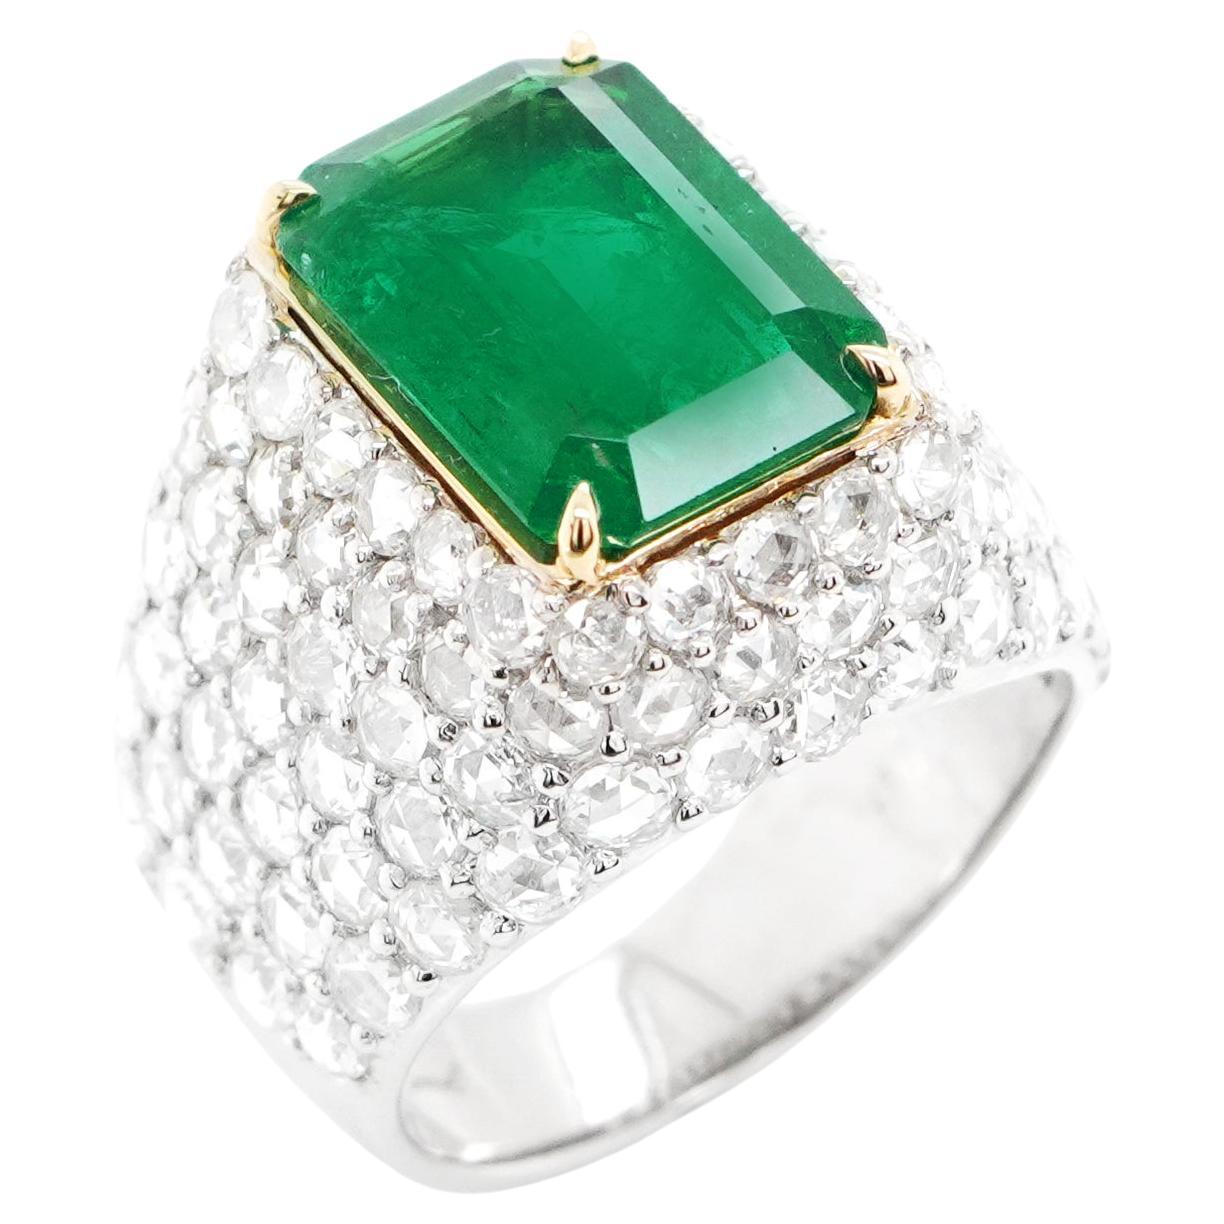 BENJAMIN FINE JEWELRY 4.97 cts Octagon Emerald with Diamond 18K Ring For Sale